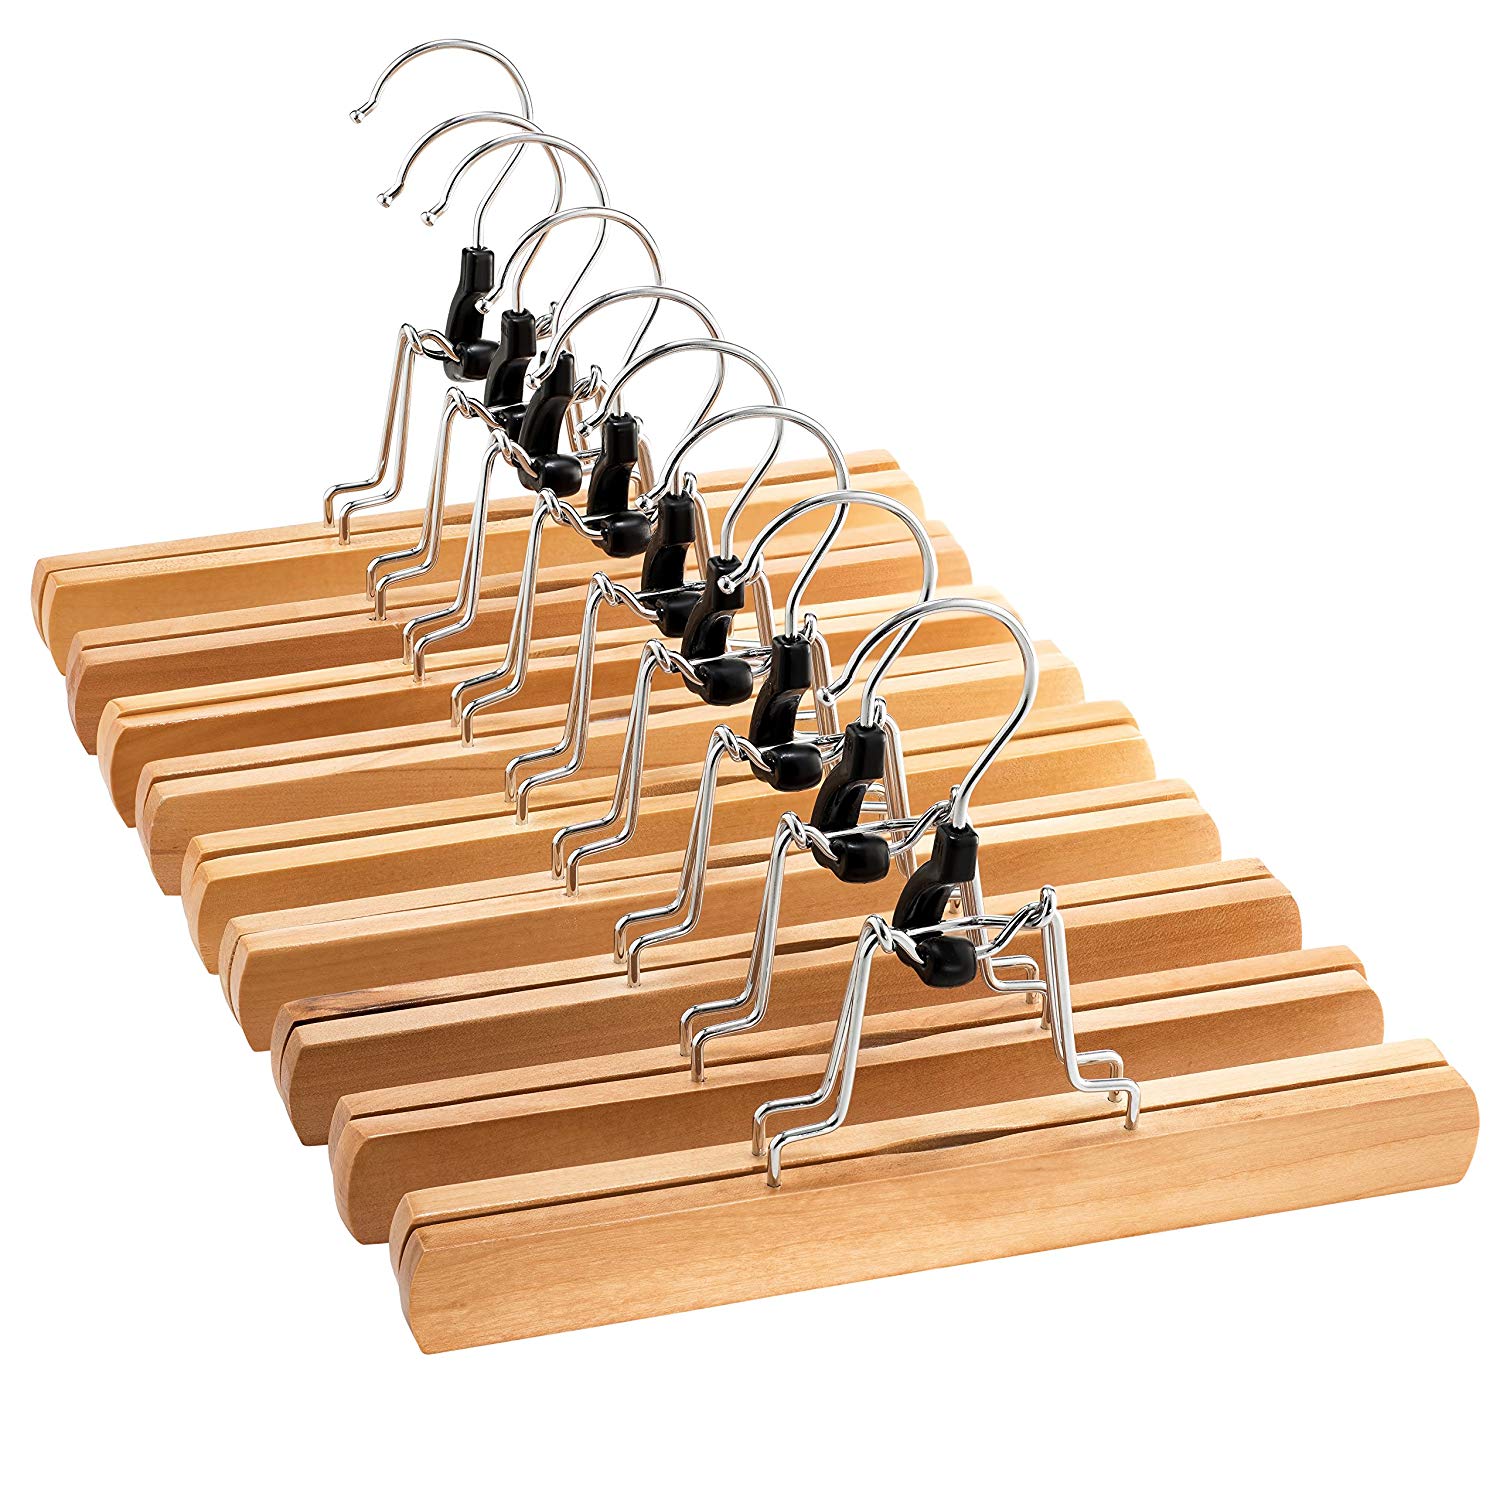 Zober Hand-Crafted Wooden Pants Hangers, 10-Pack